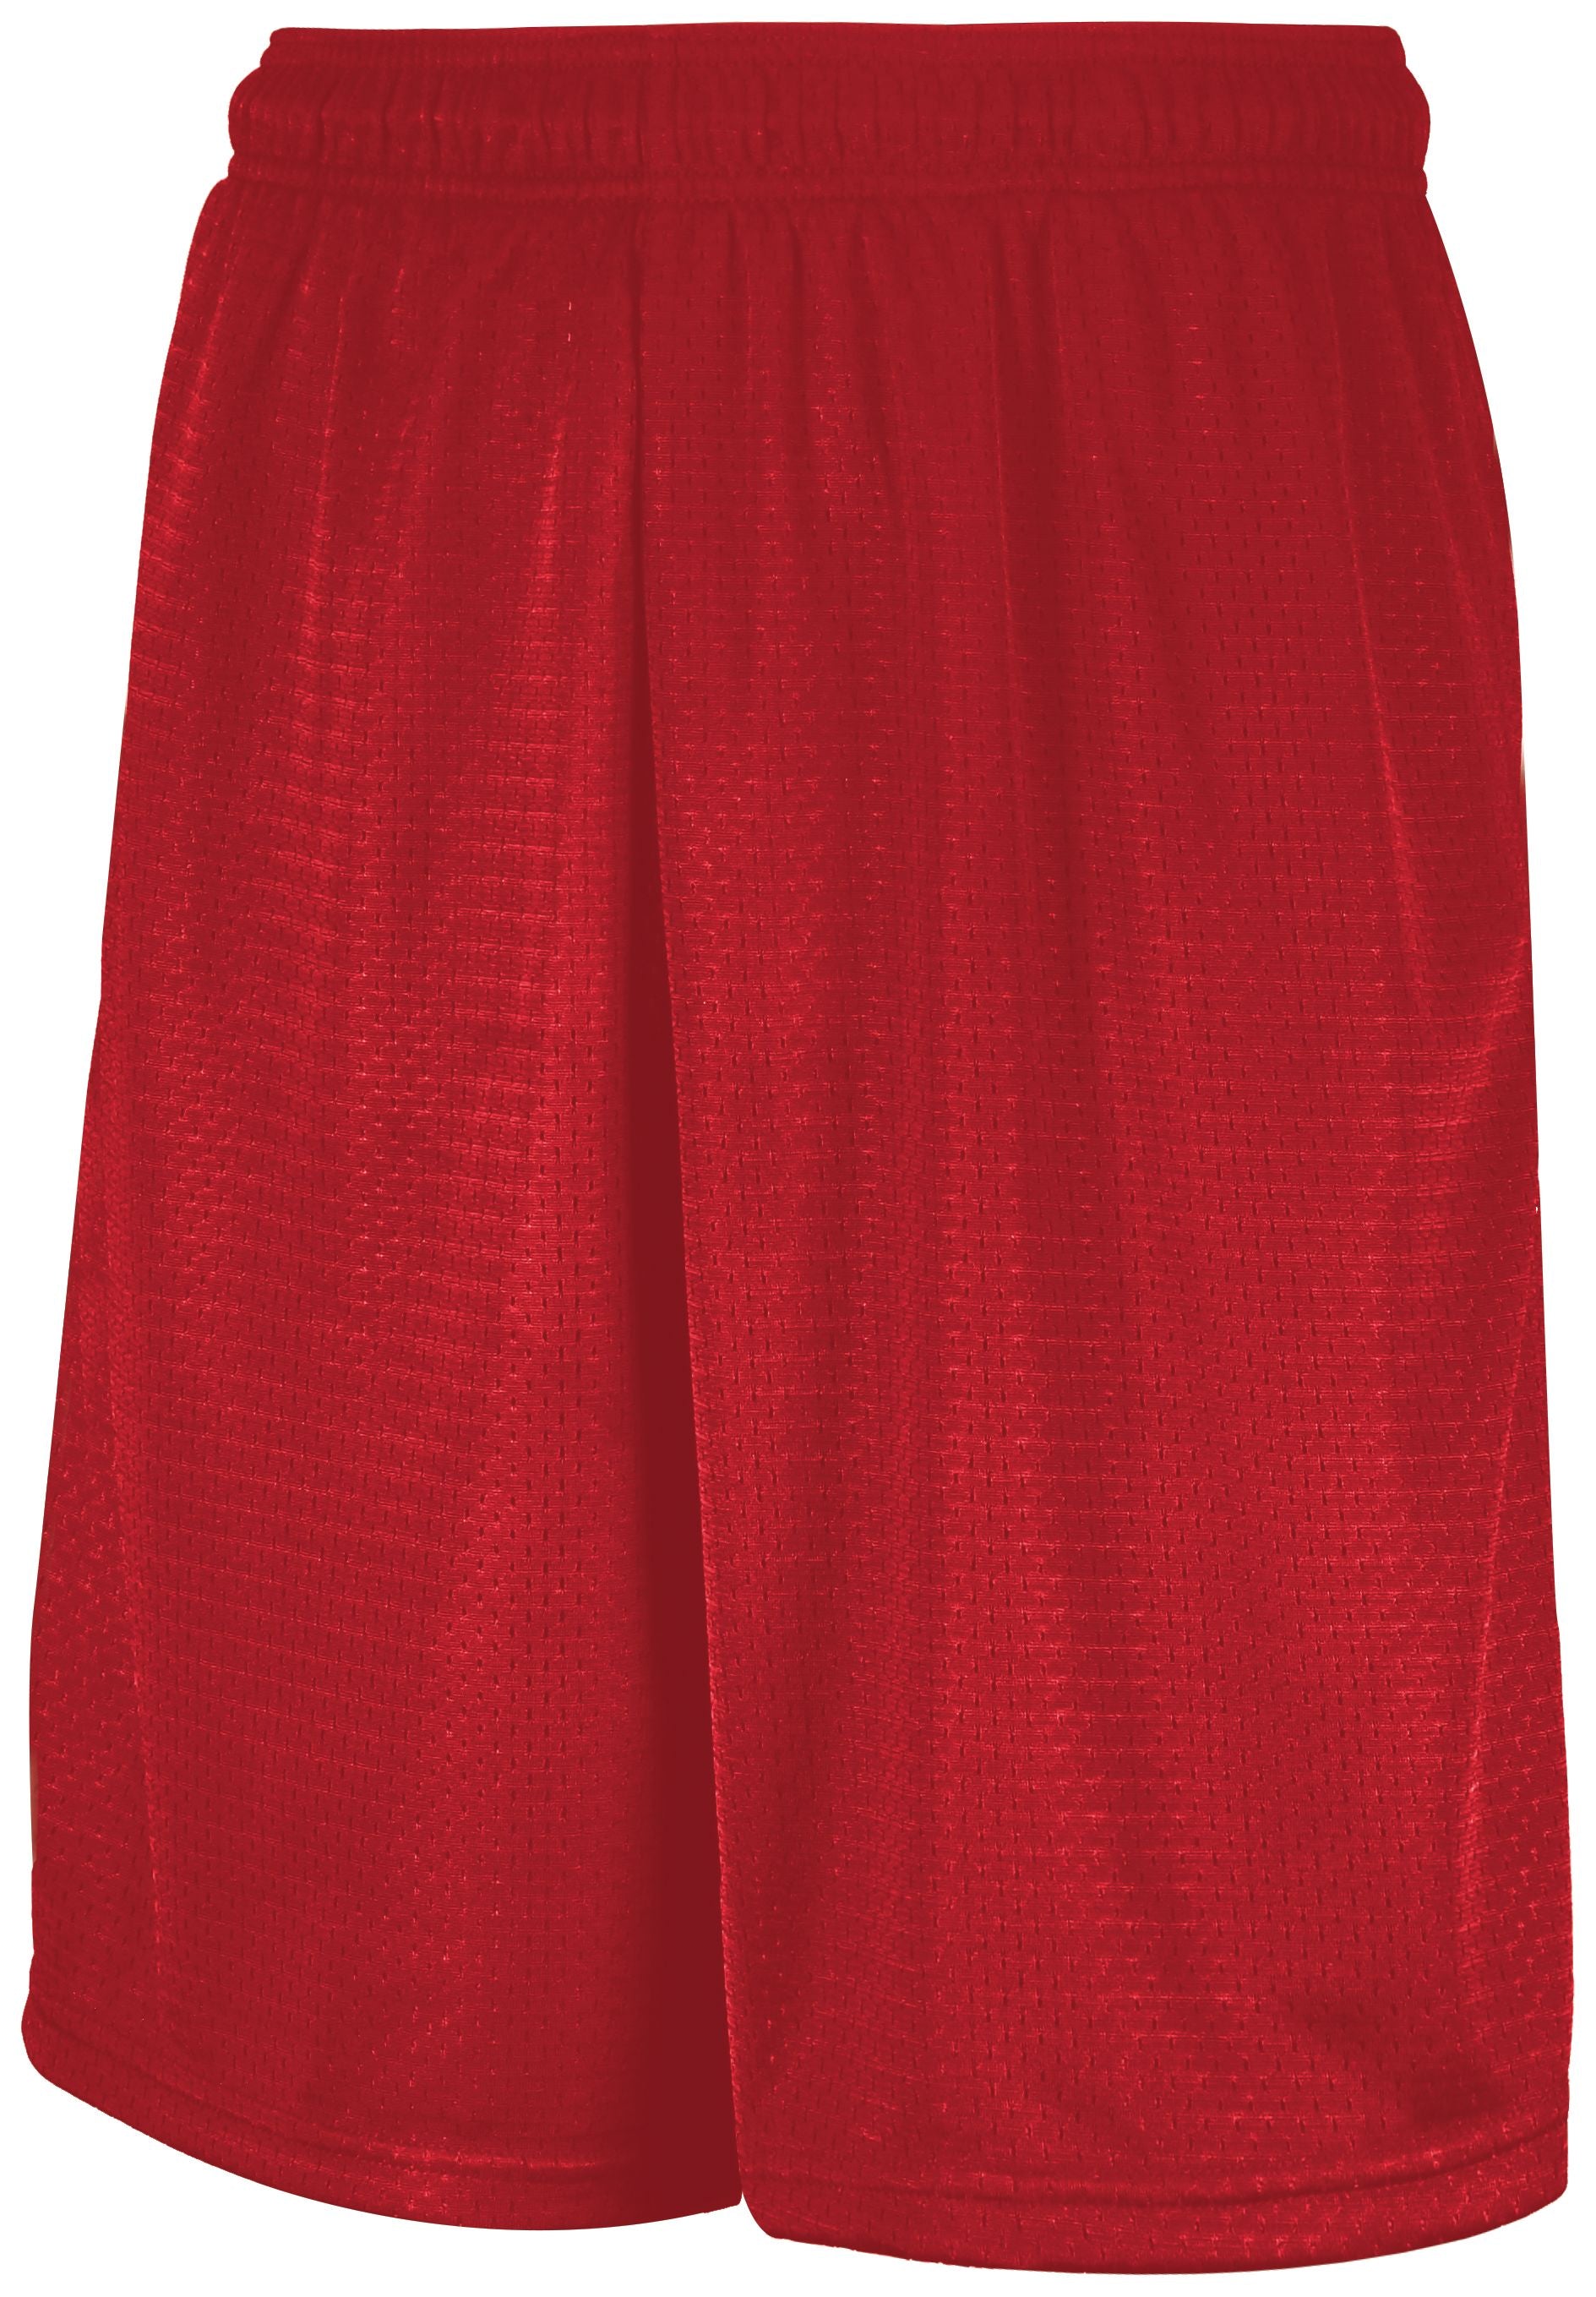 Russell Athletic Mesh Shorts With Pockets in True Red  -Part of the Adult, Adult-Shorts, Russell-Athletic-Products product lines at KanaleyCreations.com